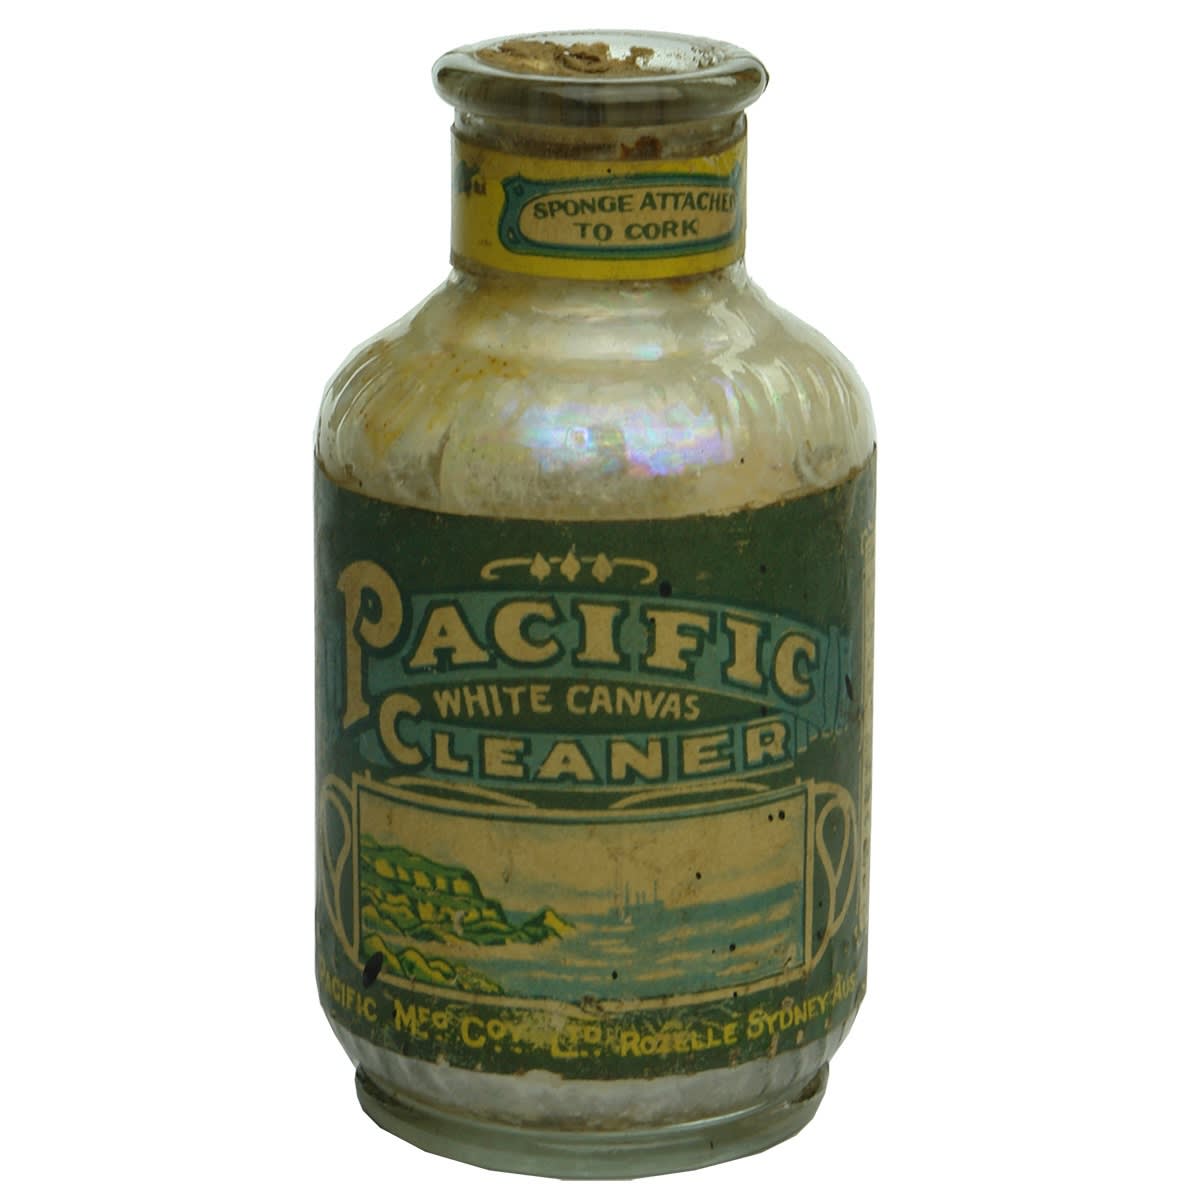 Jar. Pacific White Canvas Cleaner. Pacific Mfg Co Ltd Rozelle, Sydney. (New South Wales)